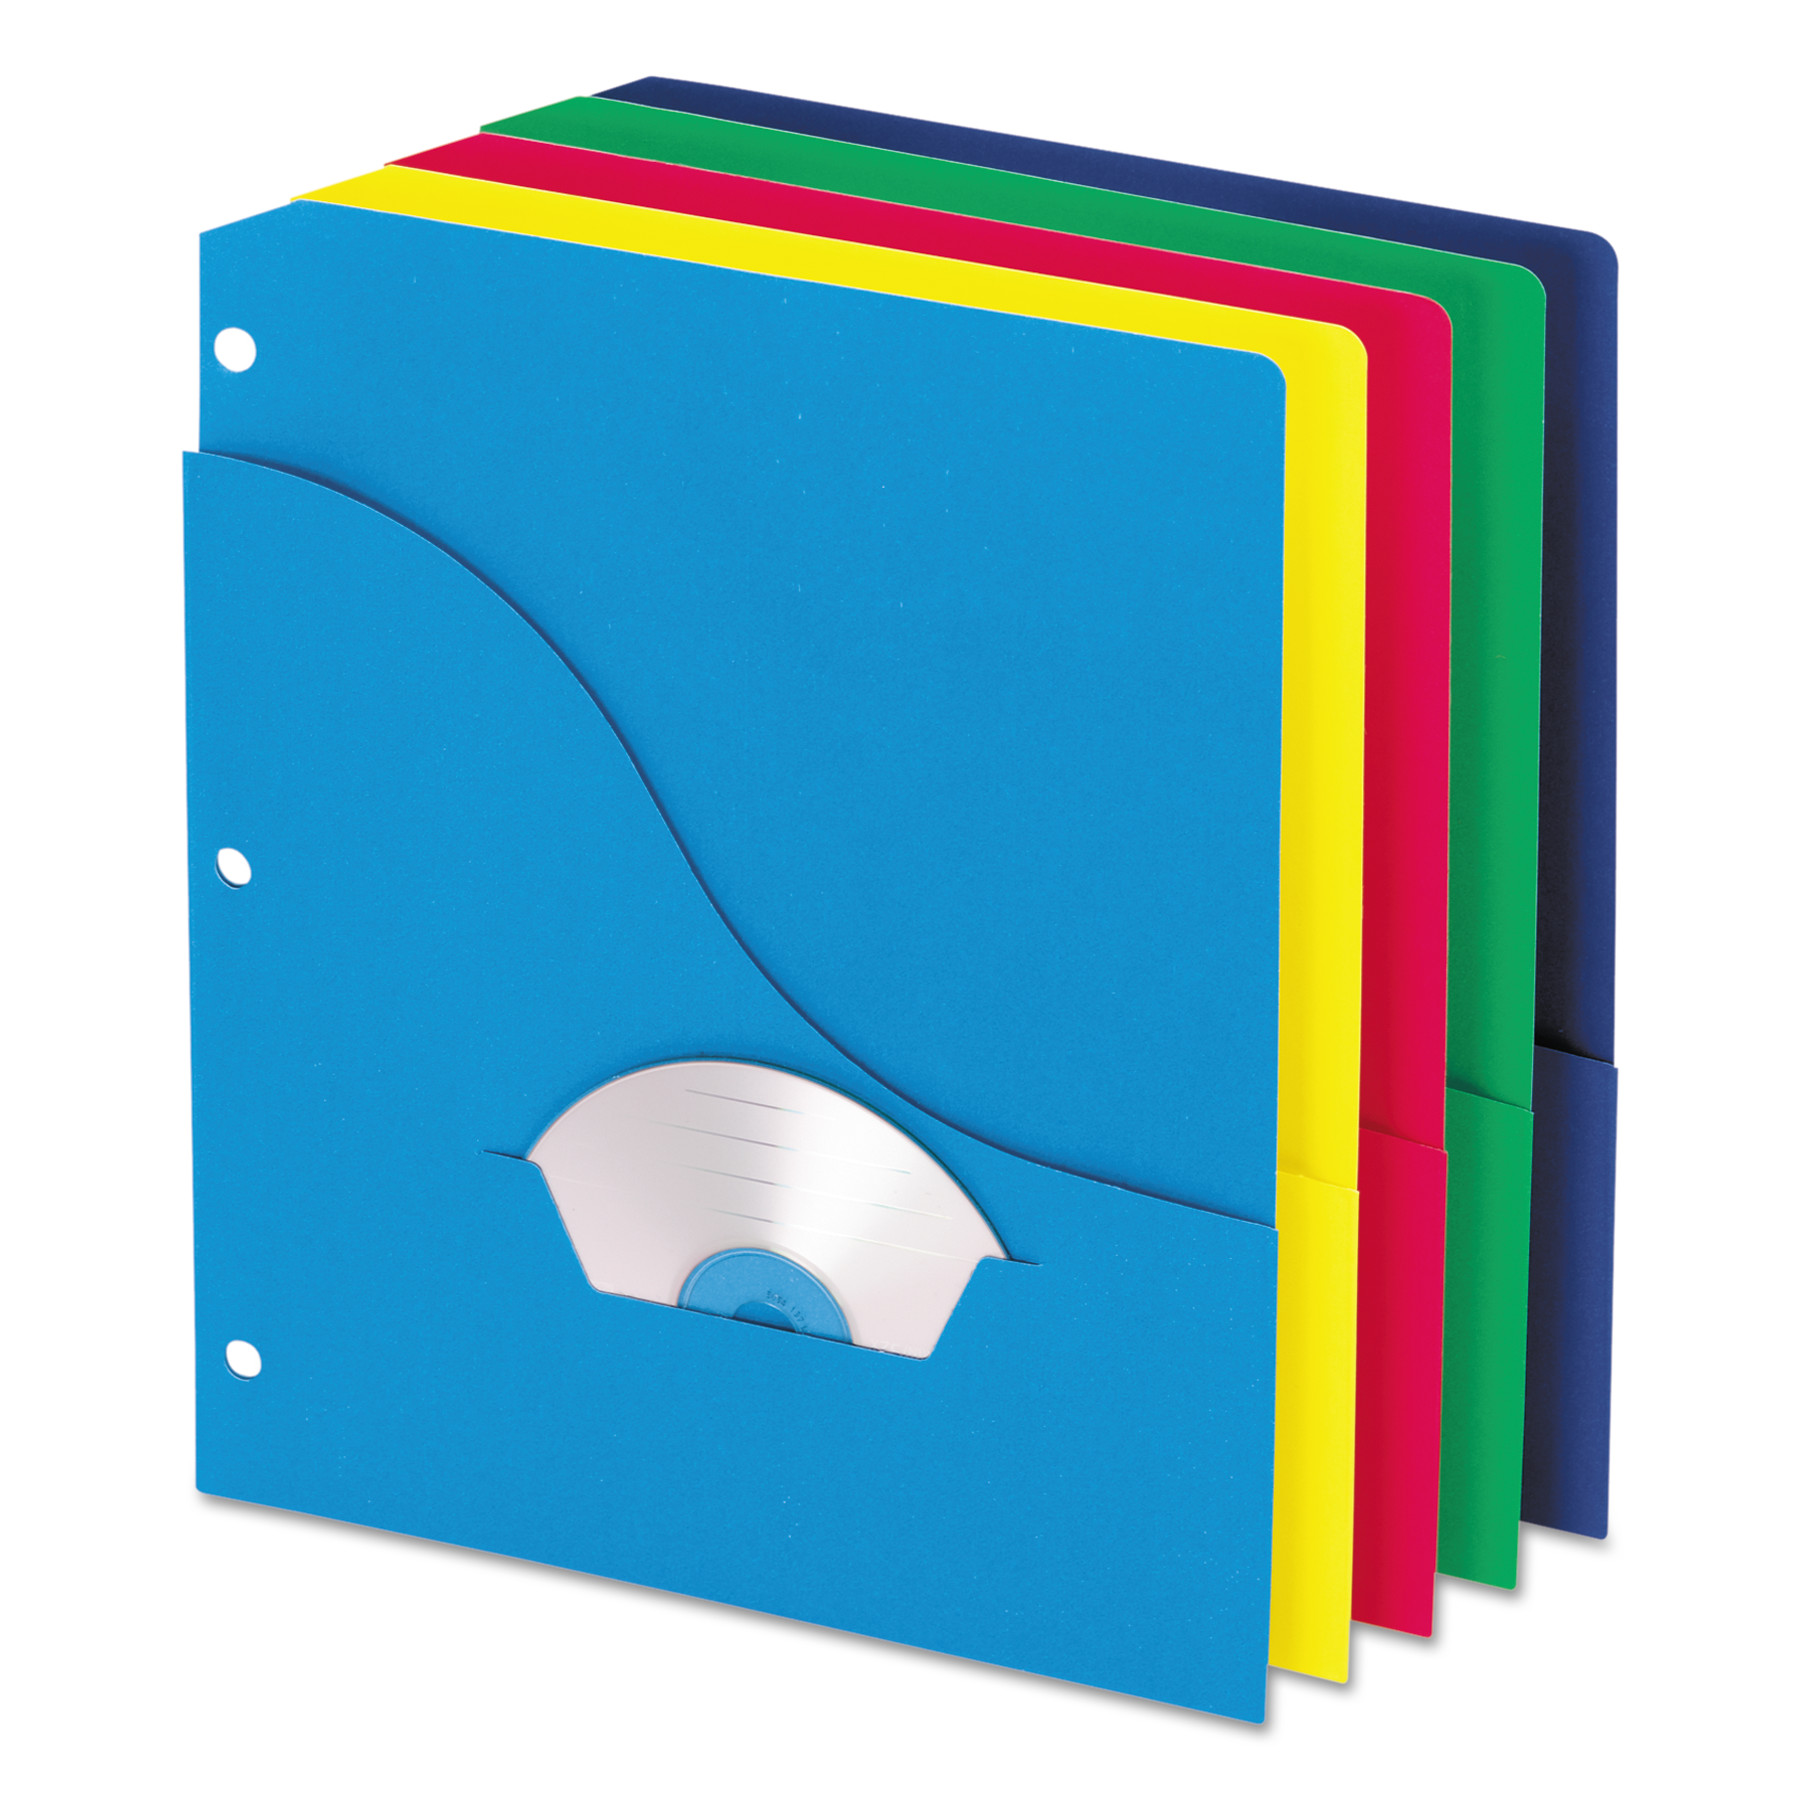  Pendaflex 32900 Pocket Project Folders, 3-Hole Punched, Letter Size, Assorted Colors, 10/Pack (PFX32900) 